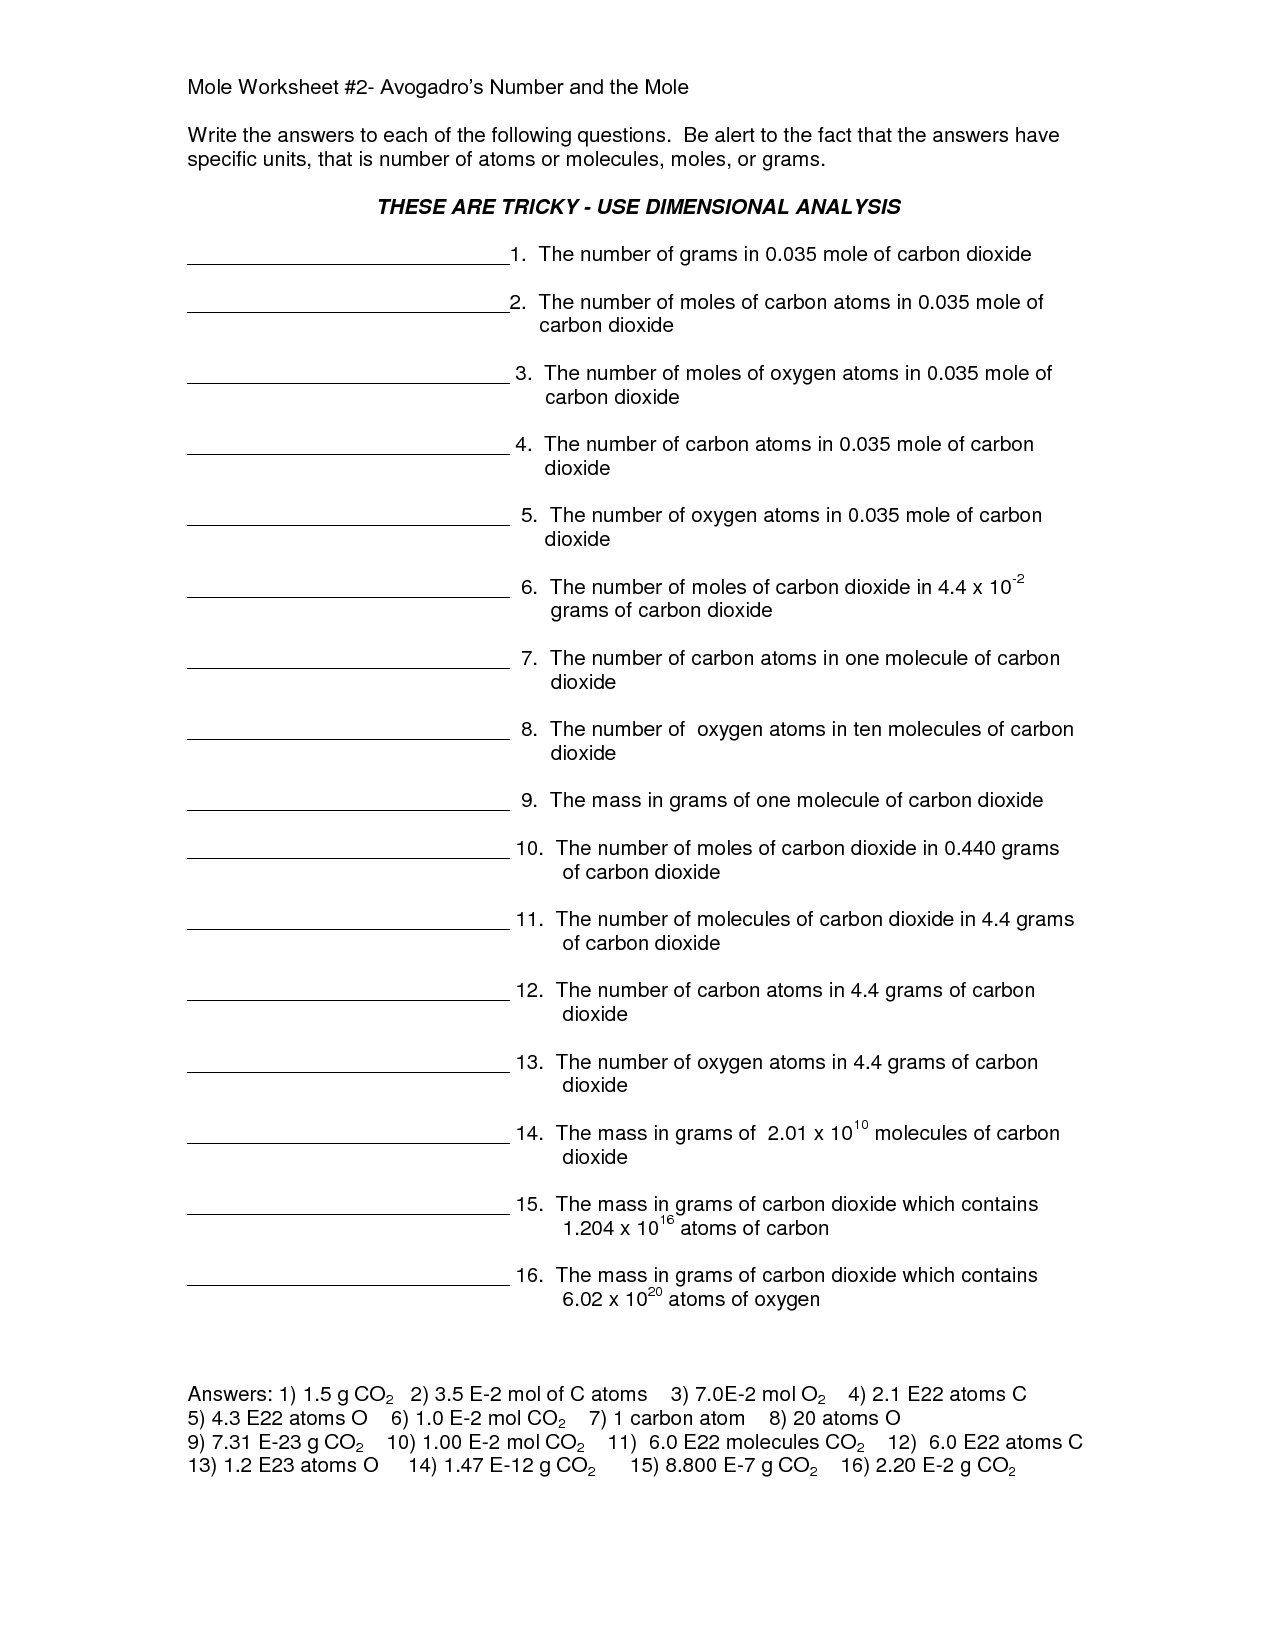 The Mole And Avogadro s Number Worksheet Pivotinspire